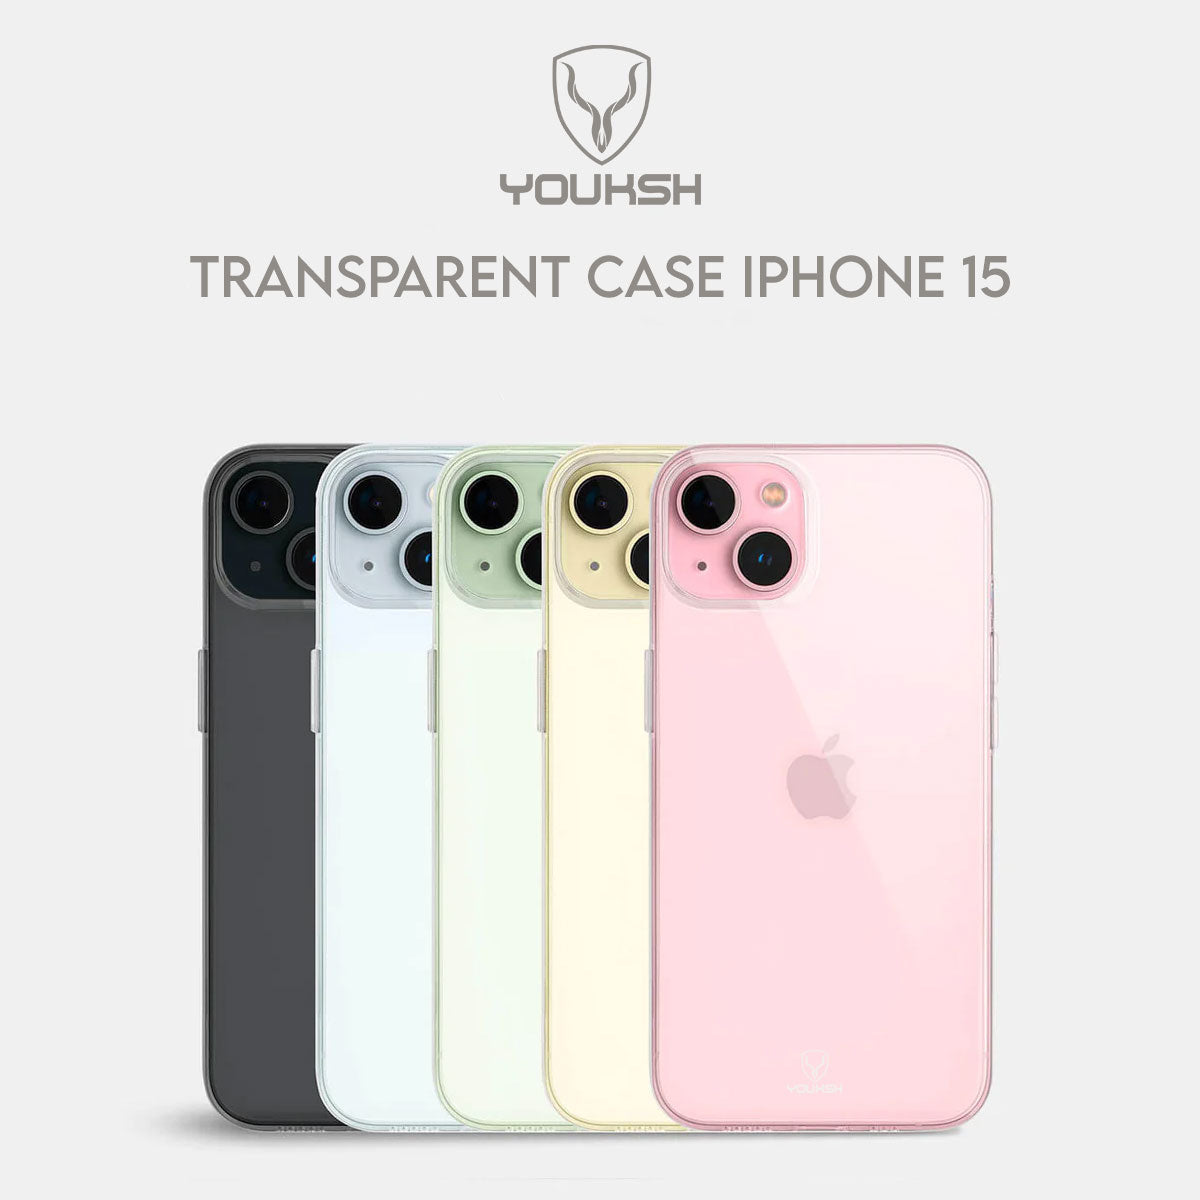 YOUSKH APPLE IPHONE 15 (6.1) TRANSPARENT CASE - YOUKSH APPLE IPHONE 15 (6.1) TRANSPARENT COVER - TRANSPARENT SOFT SHOCK PROOF JELLY BACK COVER.